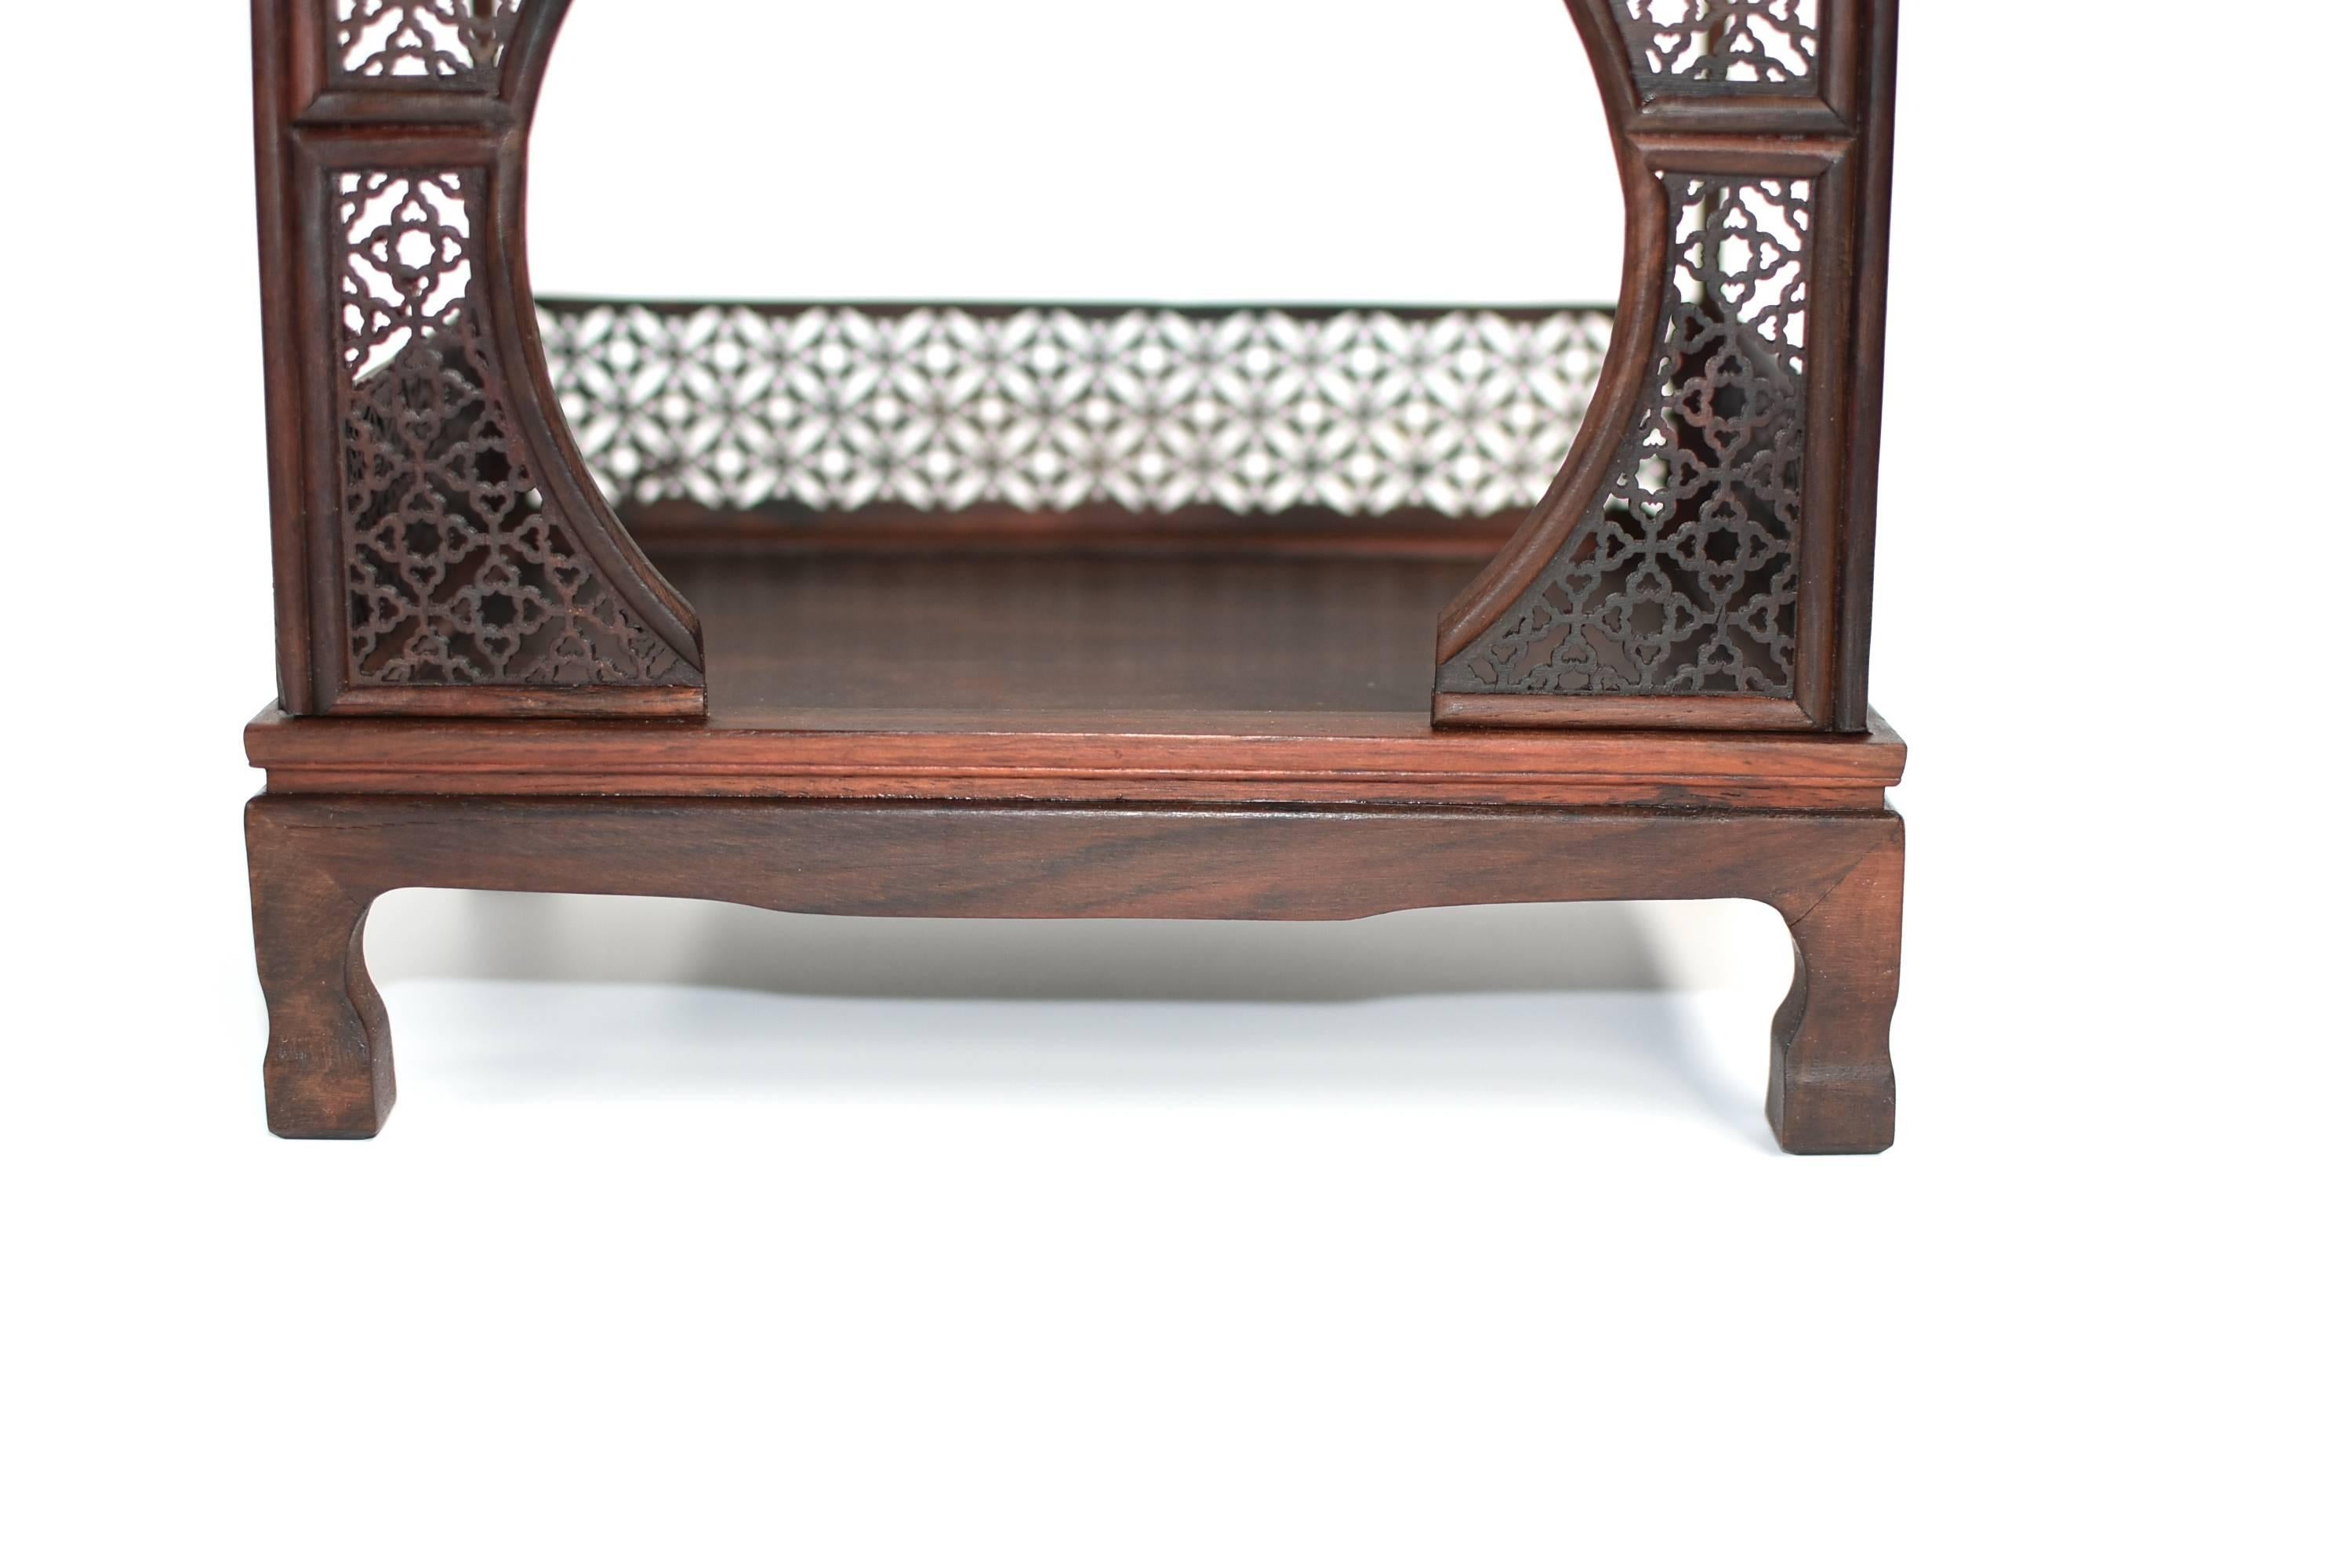 Contemporary Mini Chinese Moon Bed, Rosewood Model of Bed